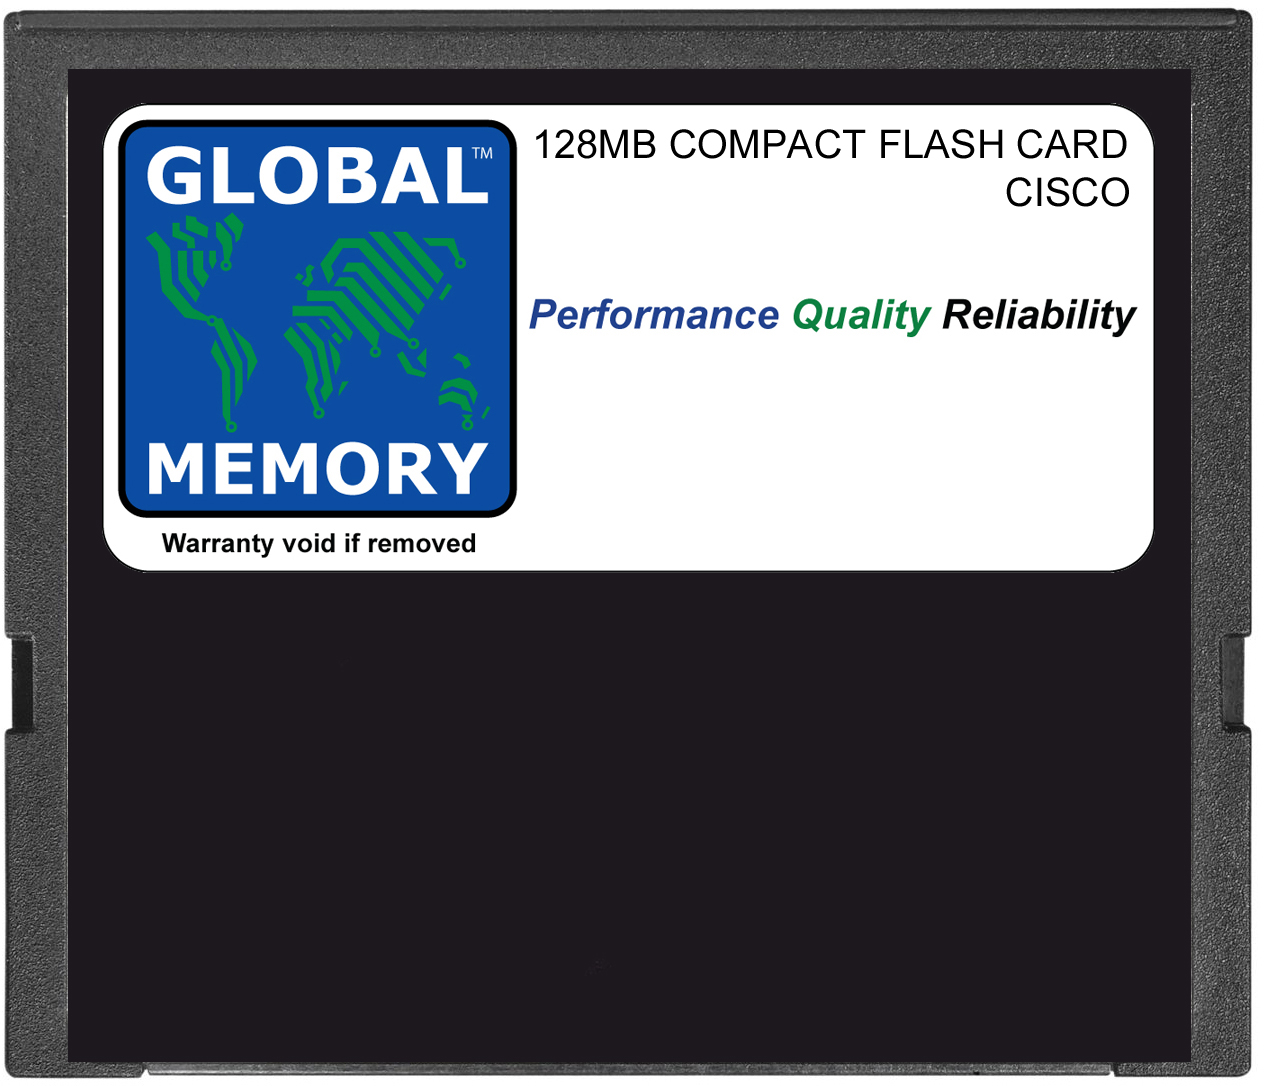 128MB COMPACT FLASH CARD MEMORY FOR CISCO 3631 ROUTER (MEM3631-128CF)